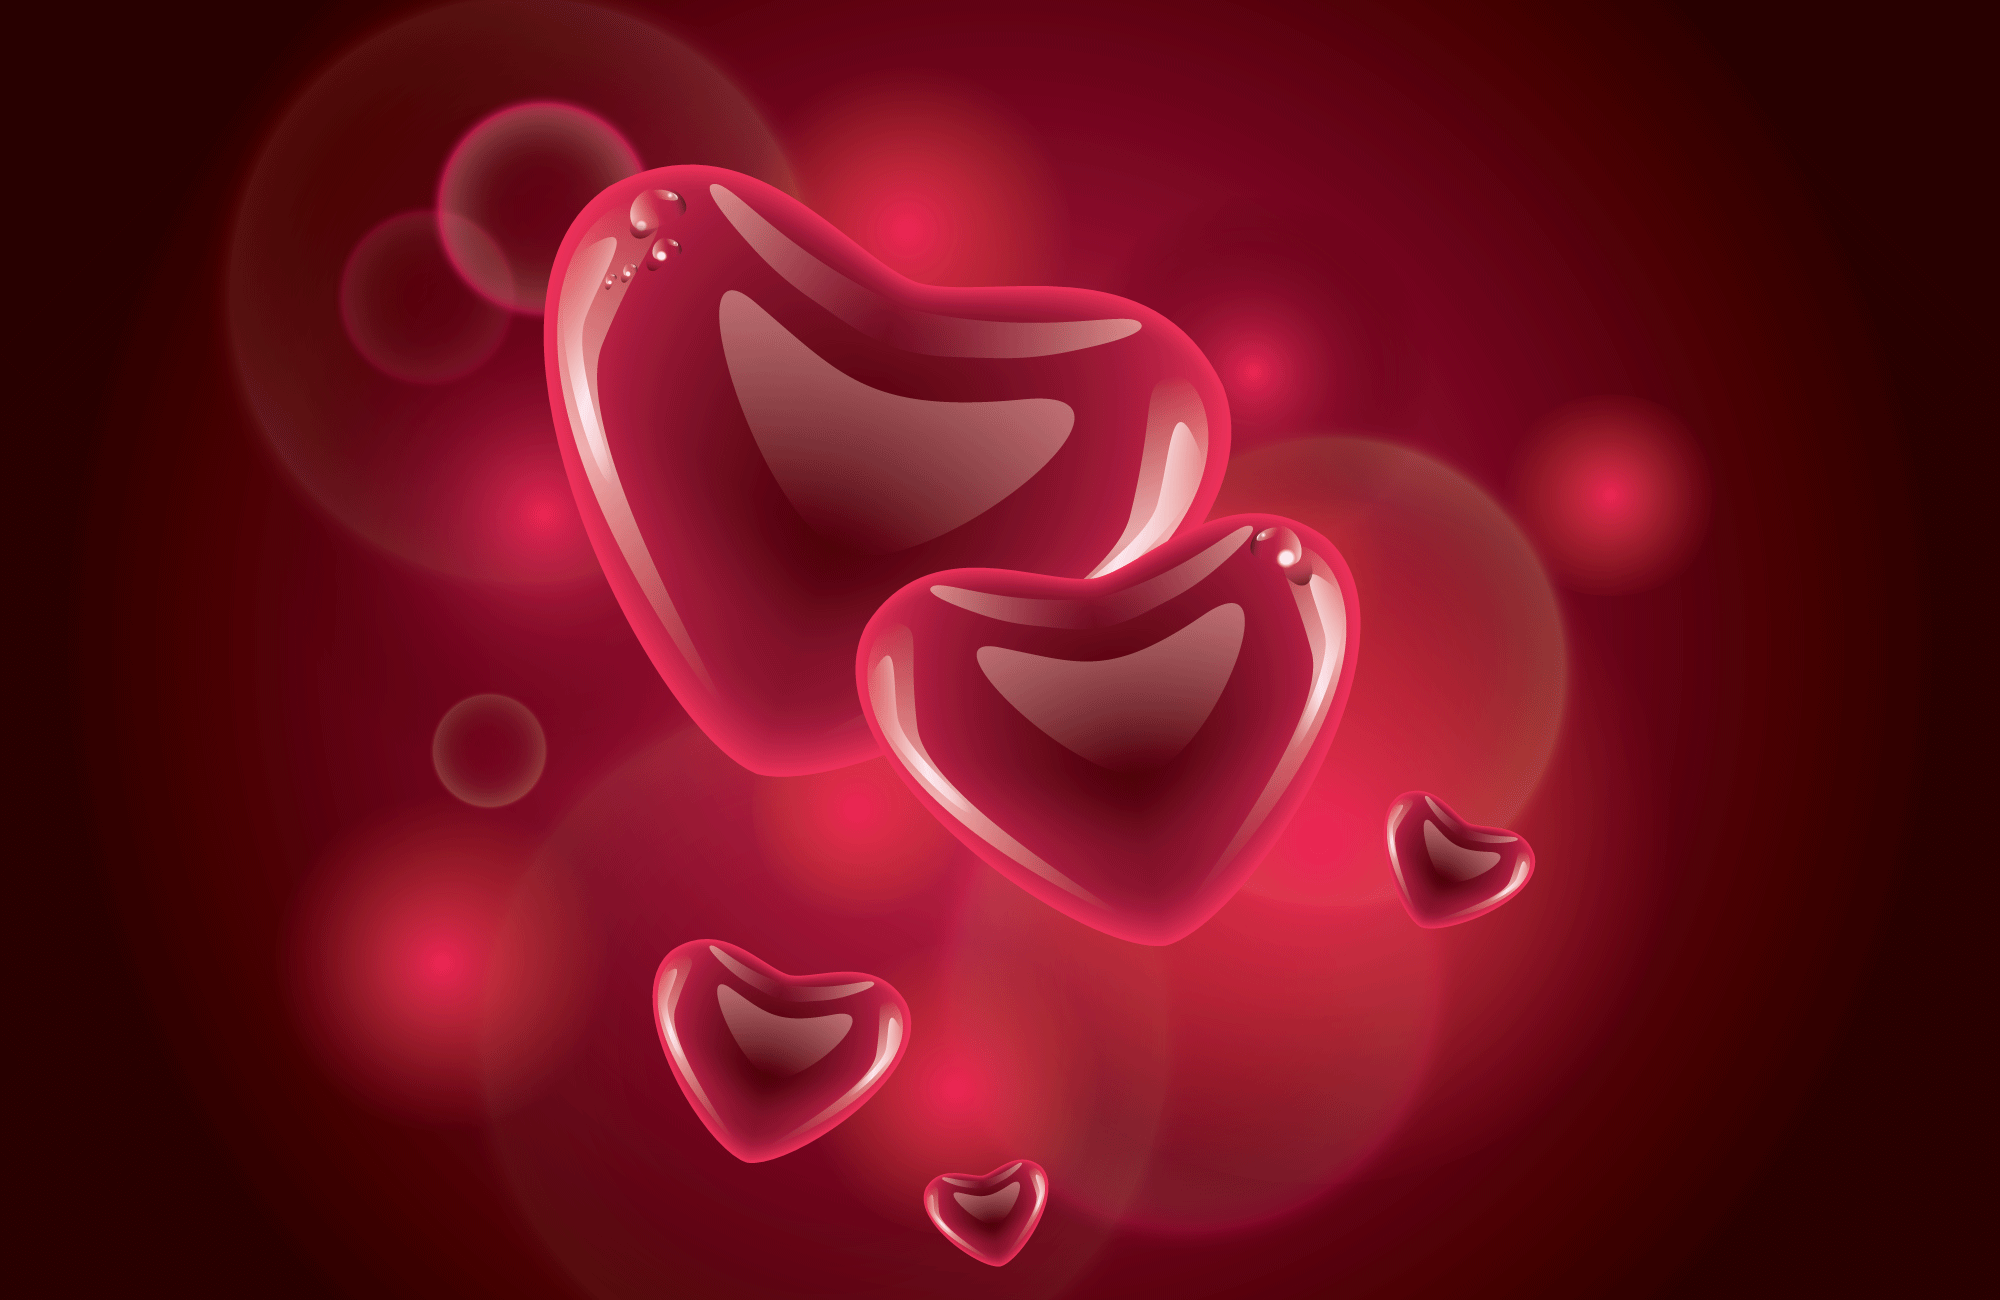 POPULAR VALENTINES DAY WALLPAPERS